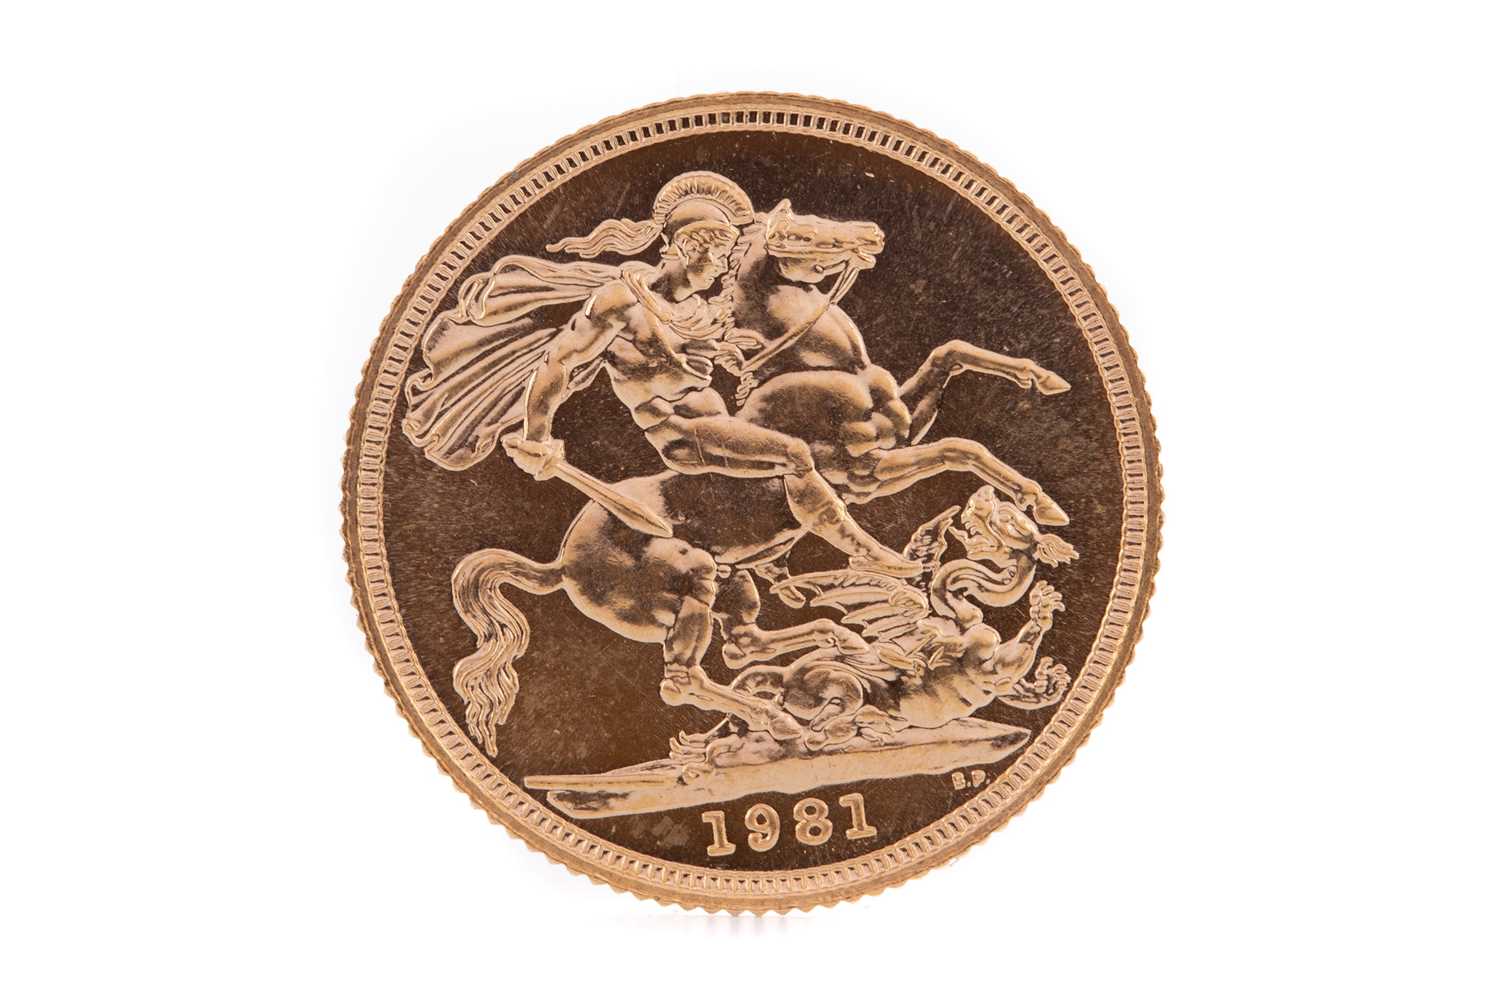 Lot 76 - AN ELIZABETH II GOLD SOVEREIGN DATED 1981